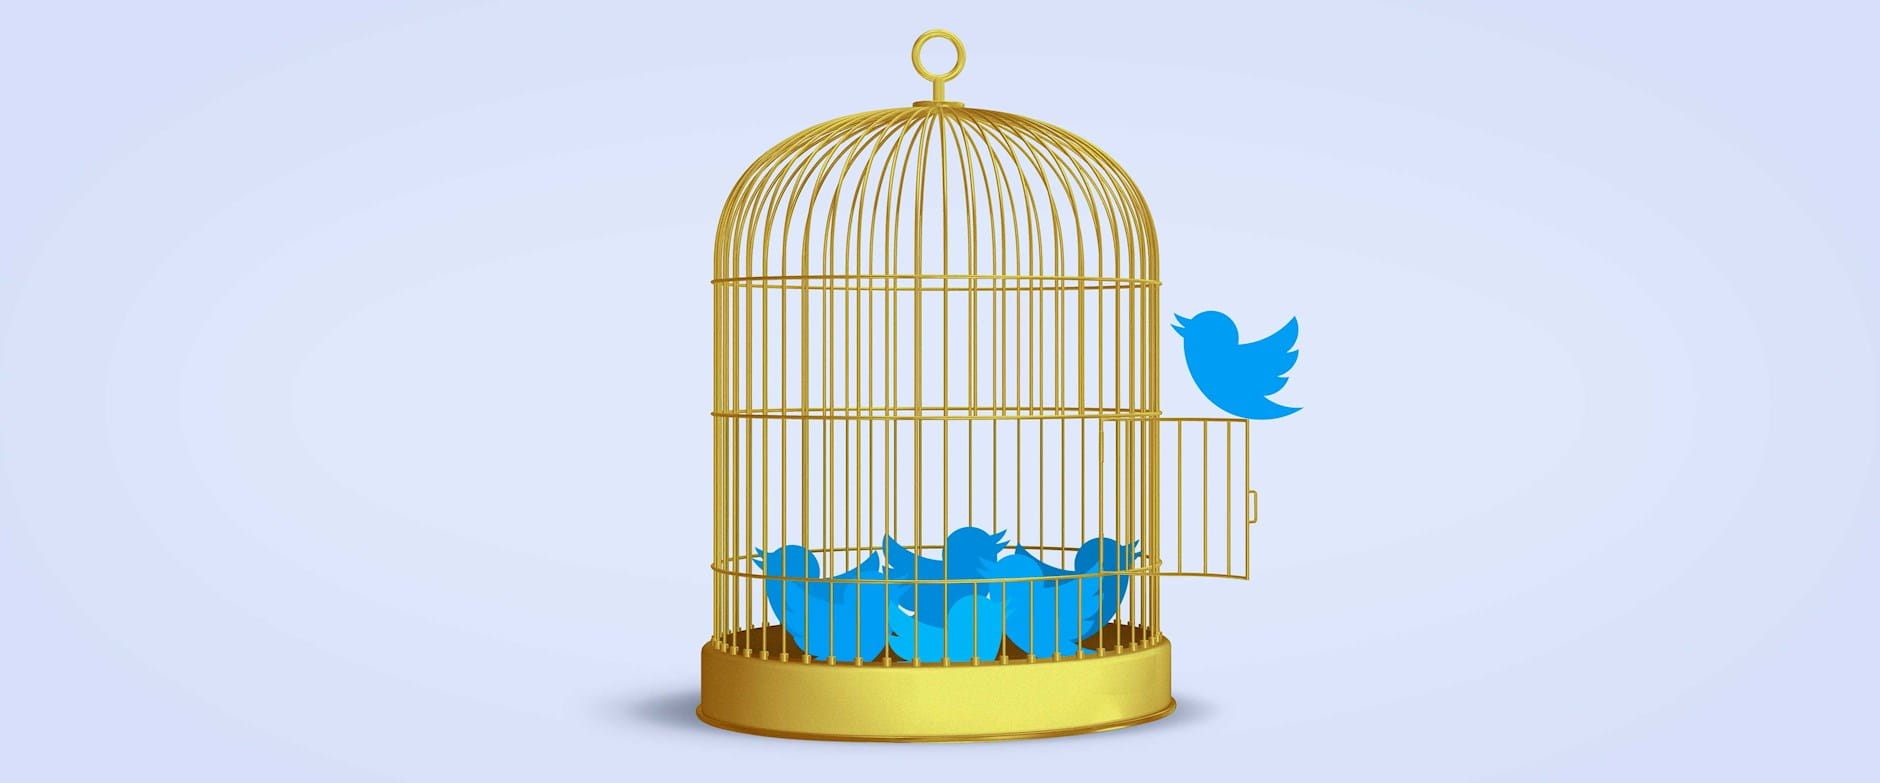 A group of Twitter logo birds in a birdcage, with one bird outside the cage